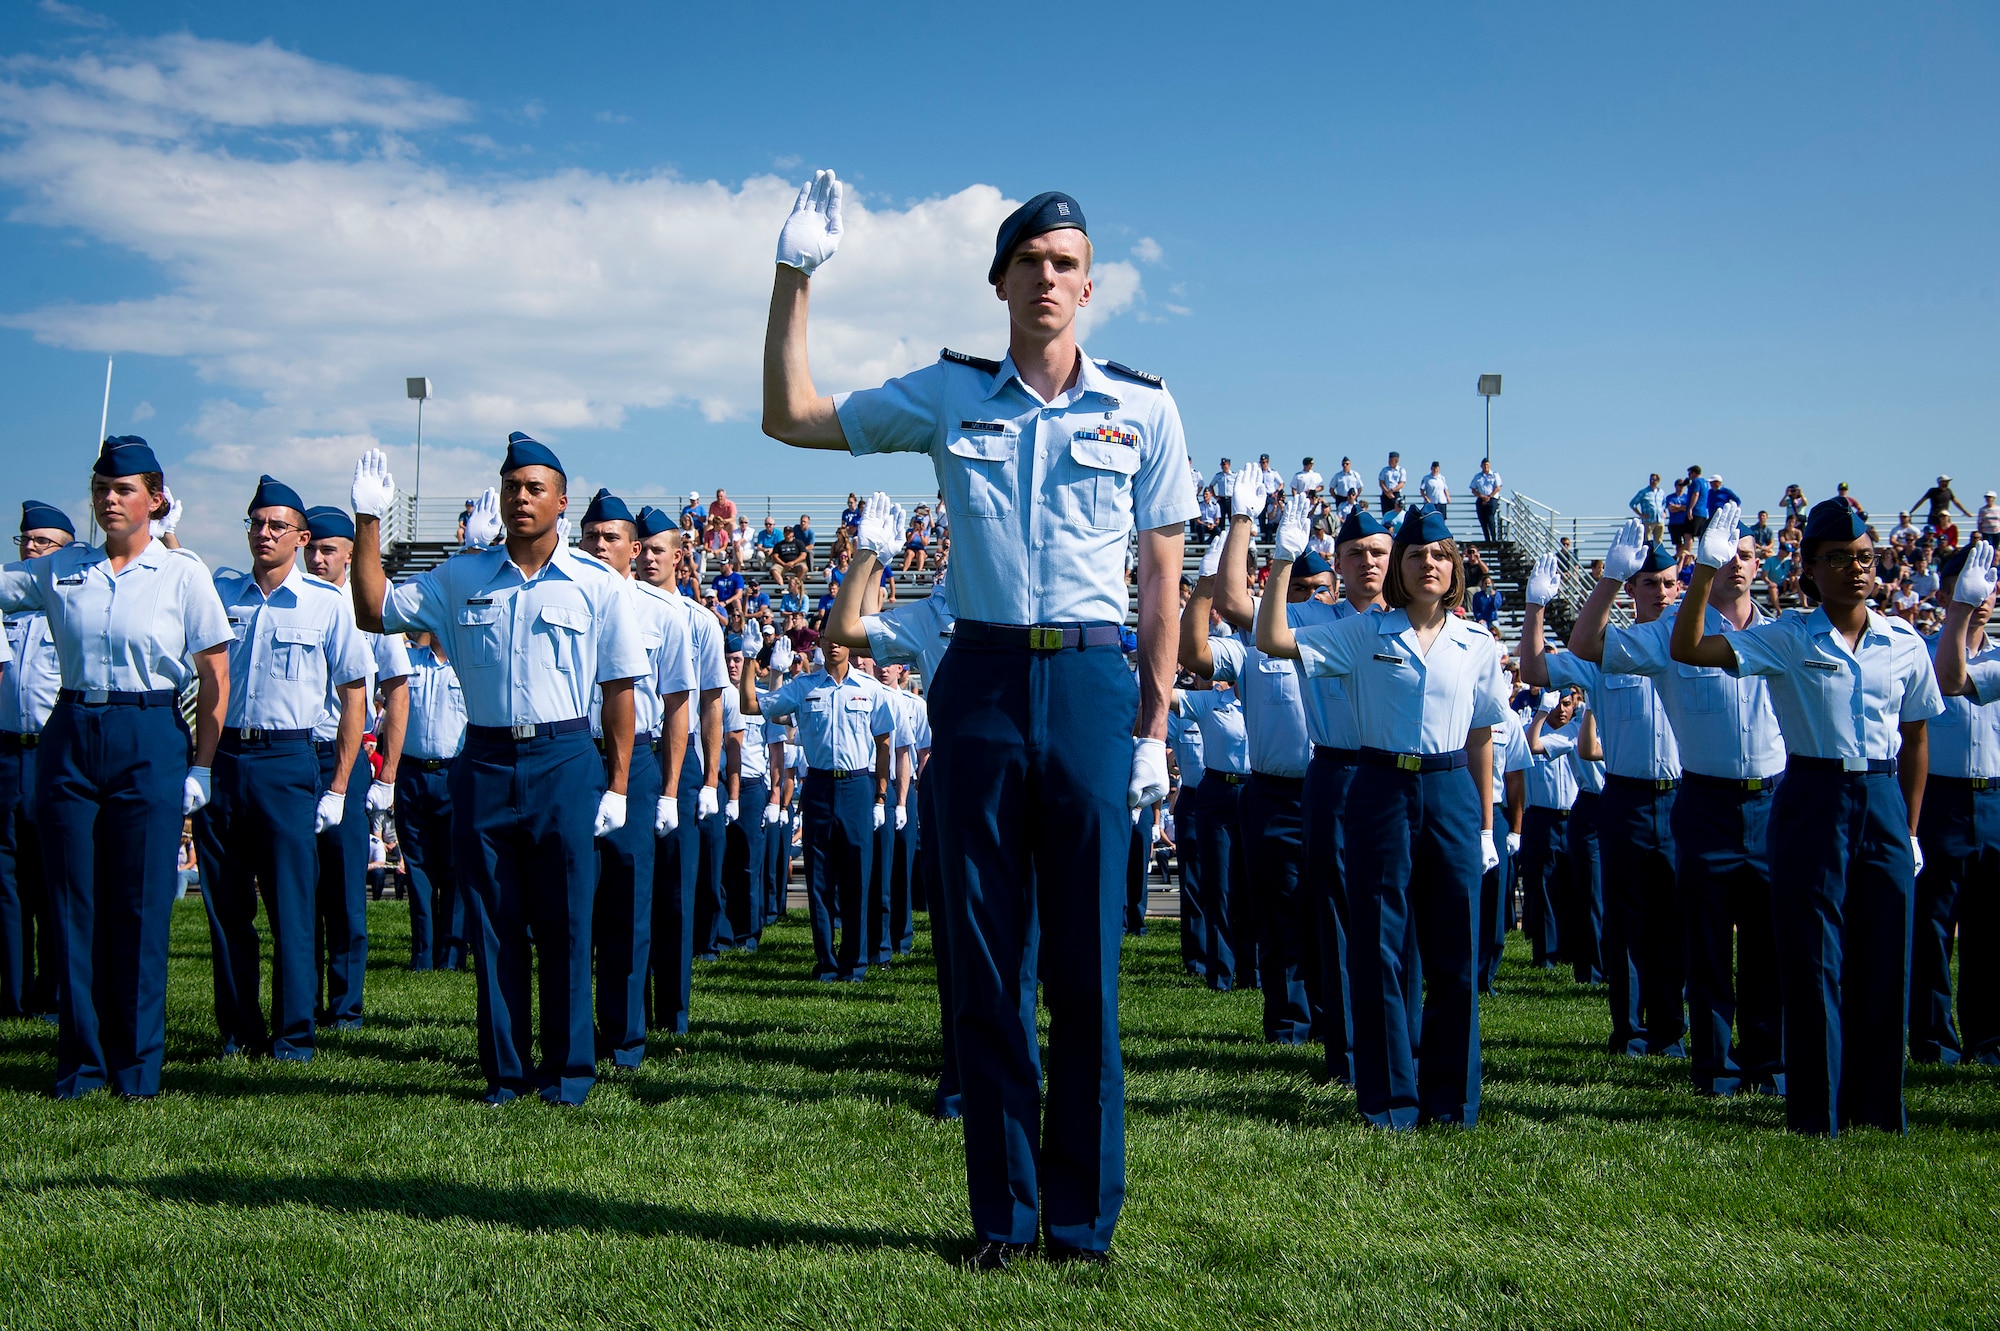 C1C Benjamin Miller, Demons Echo Flight commander, leads a group of fourth class cadets to cite the honor oath during the U.S. Air Force Academy’s Acceptance Day ceremony at Stillman Parade Field